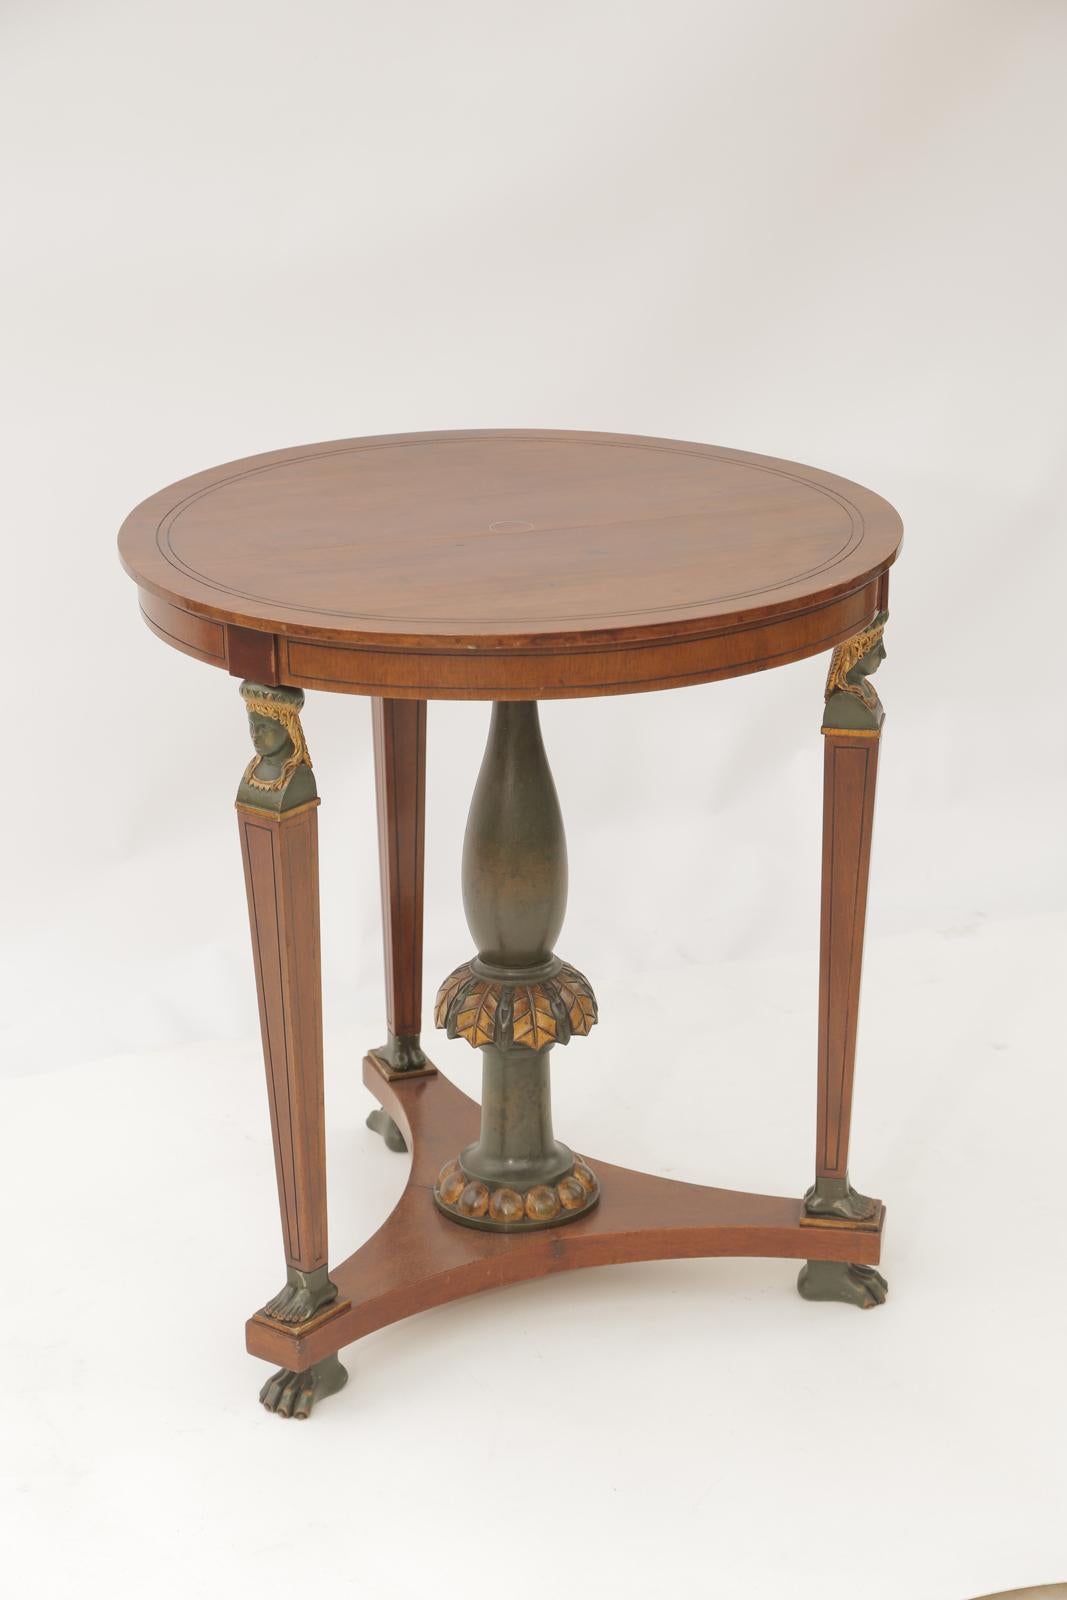 Unusual table, of rosewood with polychrome accents, having a round top accented by a brass ring, raised on a trio of herms as legs, each surmounted by an Egyptian torso, and ending in a pair of feet, on a concave tripartite plinth, with a turned and